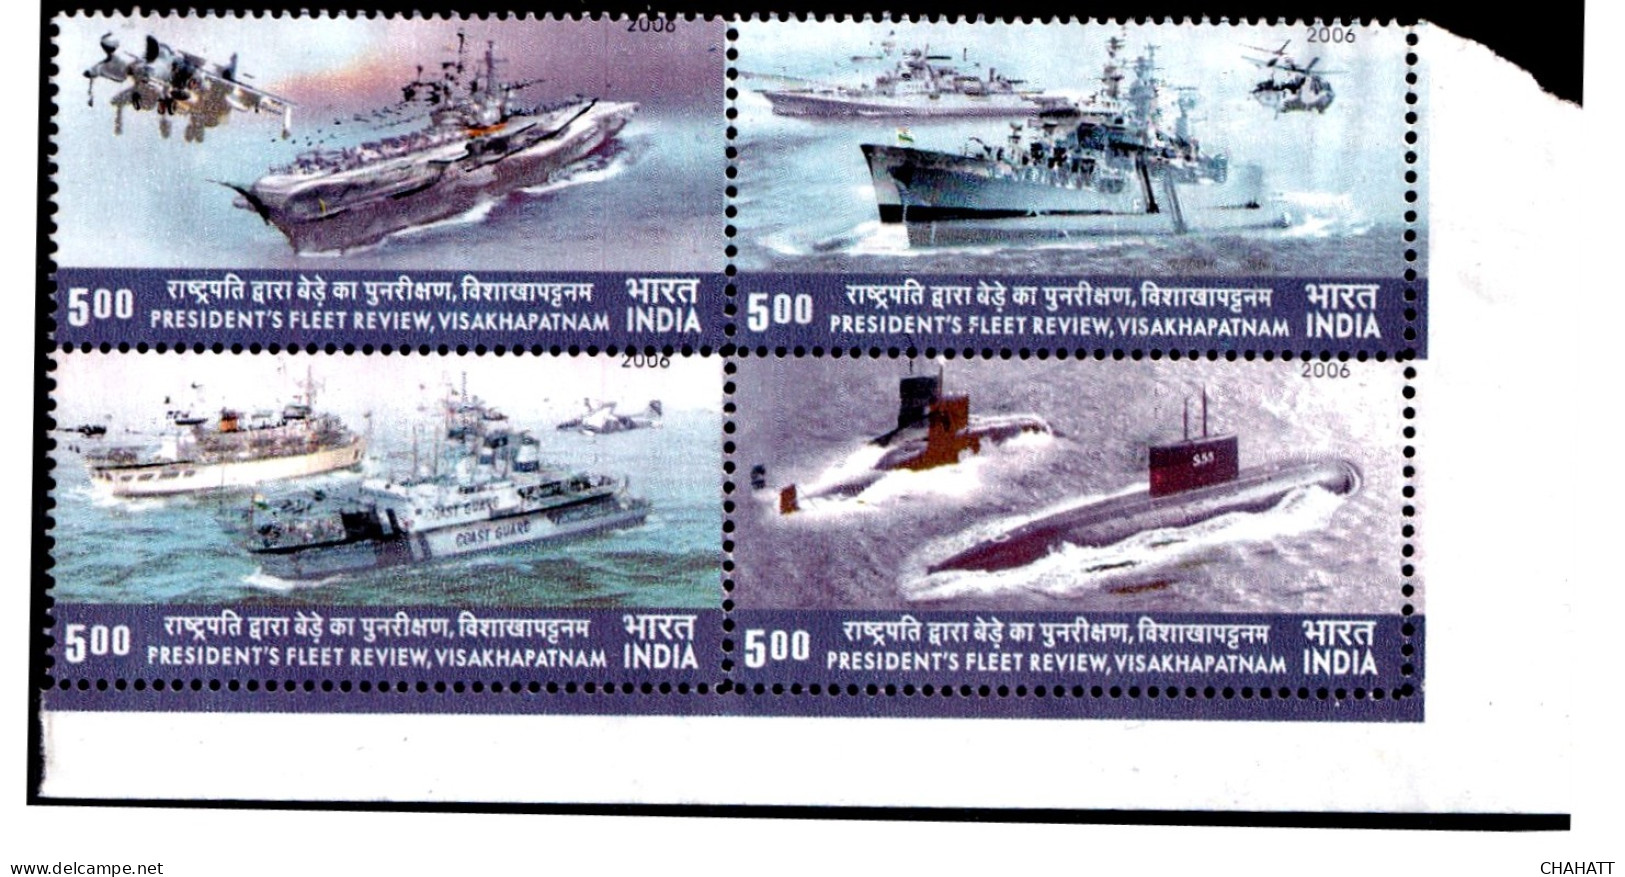 INDIA-2006- PRESIDENT'S FLEET REVIEW- ERROR- HELICOPTERS- NAVAL SHIPS-GHOST IMAGES- SETENANT BLK OF 4-MNH-IE-47 - Plaatfouten En Curiosa